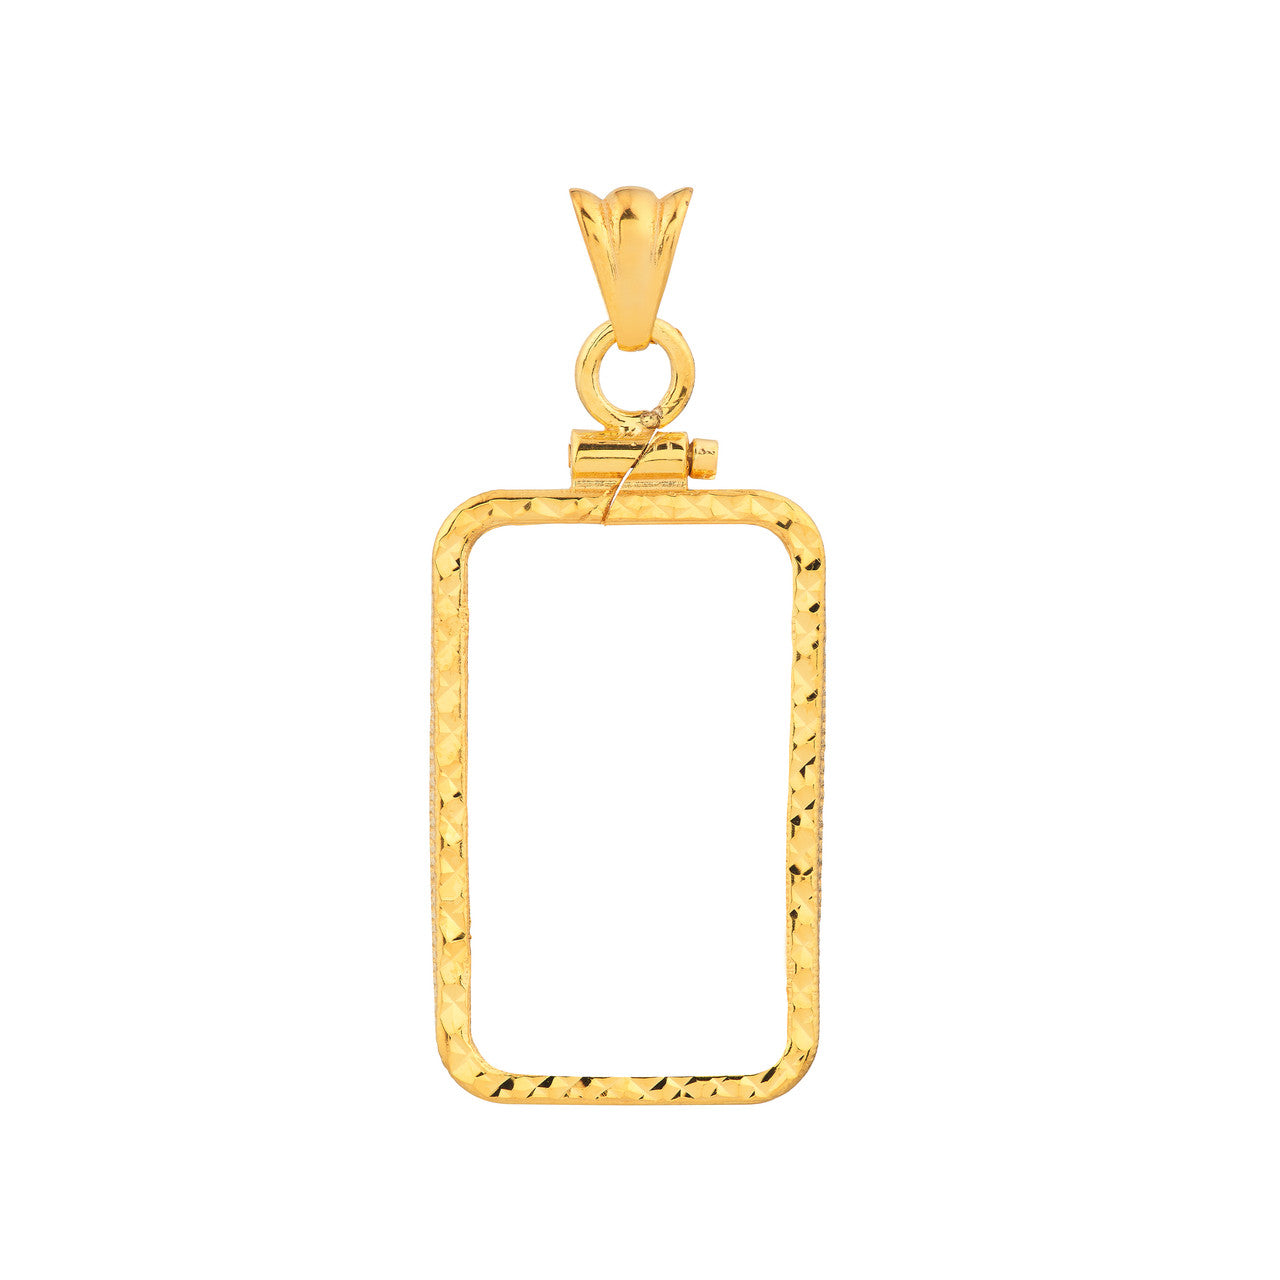 14K Yellow Gold Pamp Suisse Lady Fortuna 10 gram Bar Coin Bezel Diamond Cut Screw Top Frame Mounting Holder Pendant Charm